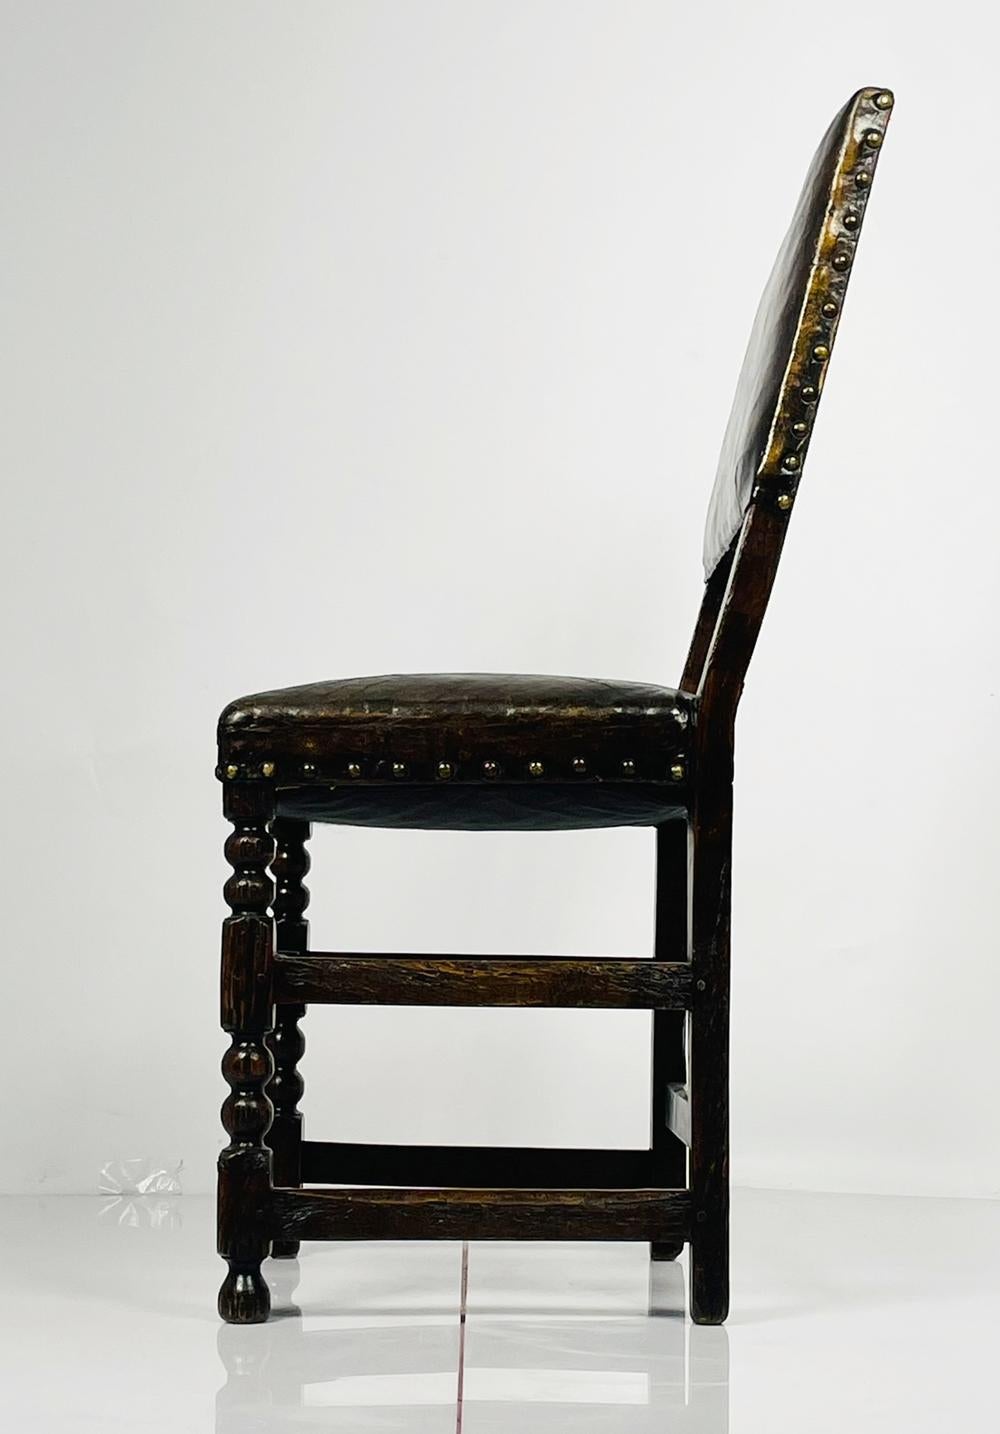 French Antique Leather & Wood Chair With Painting on Seat & Backrest, Made in France